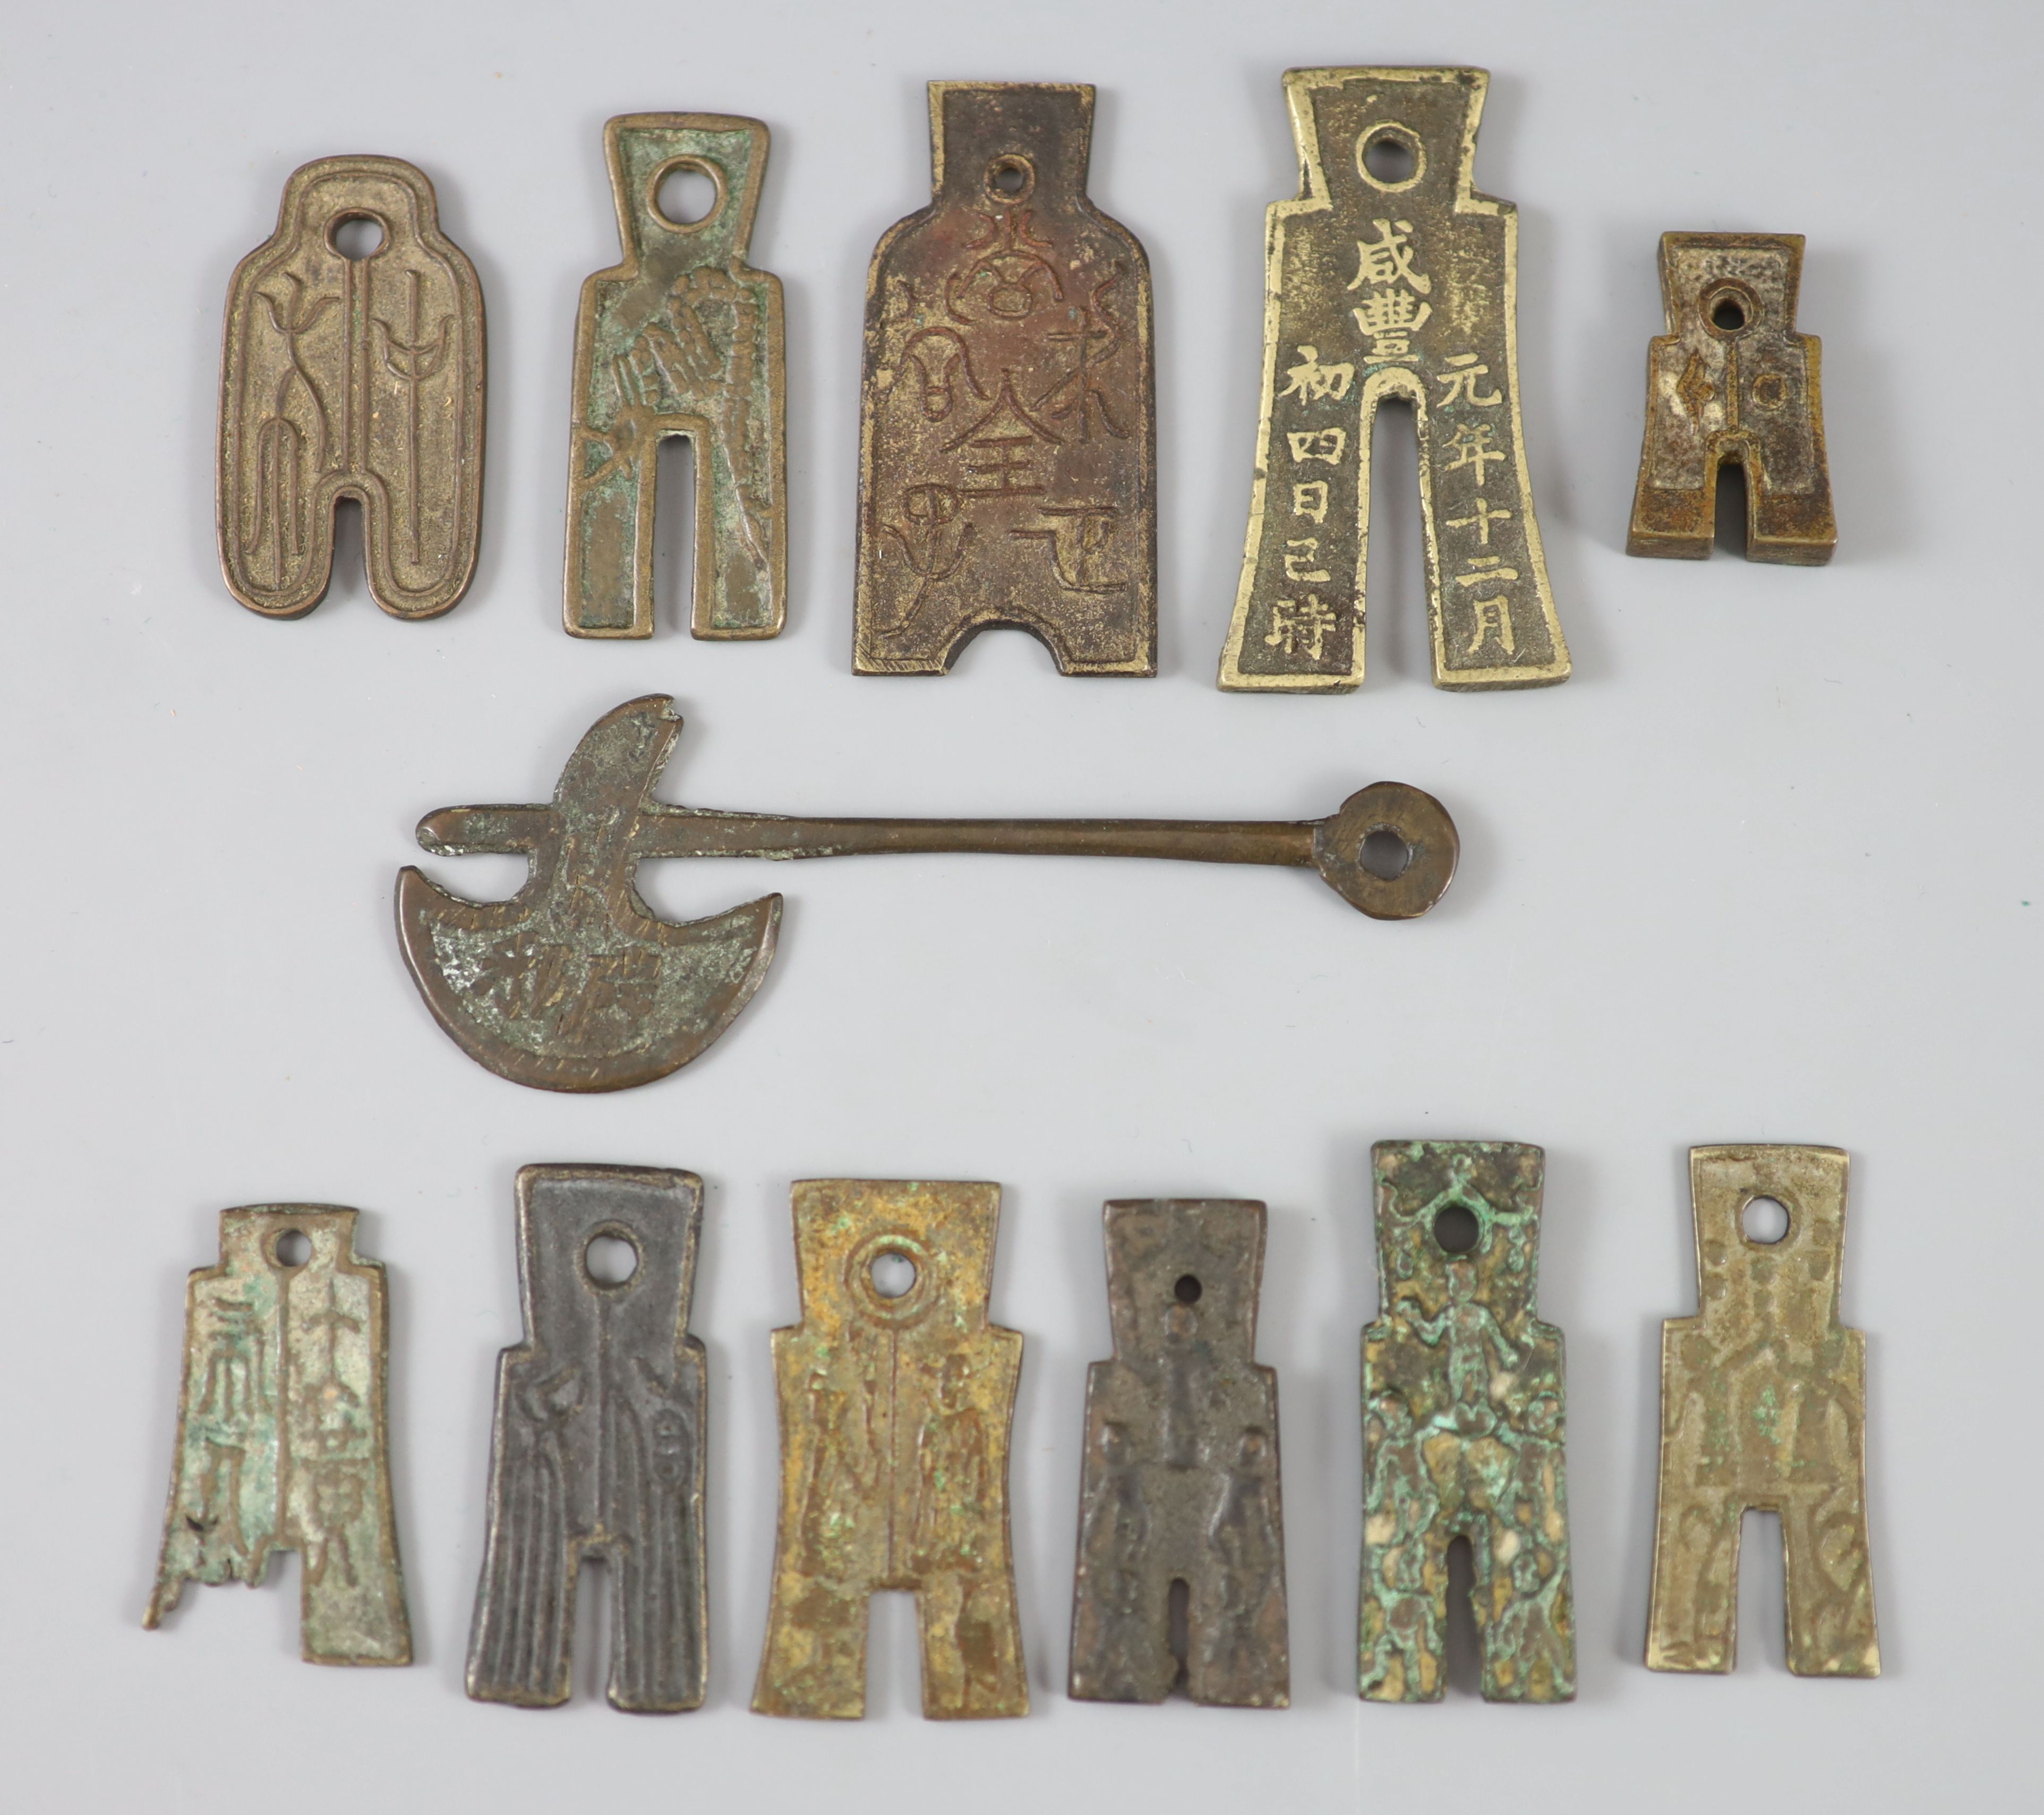 China, 11 bronze spade shaped charms or amulets, Qing dynasty, 31-61mm, F to VF, together with a